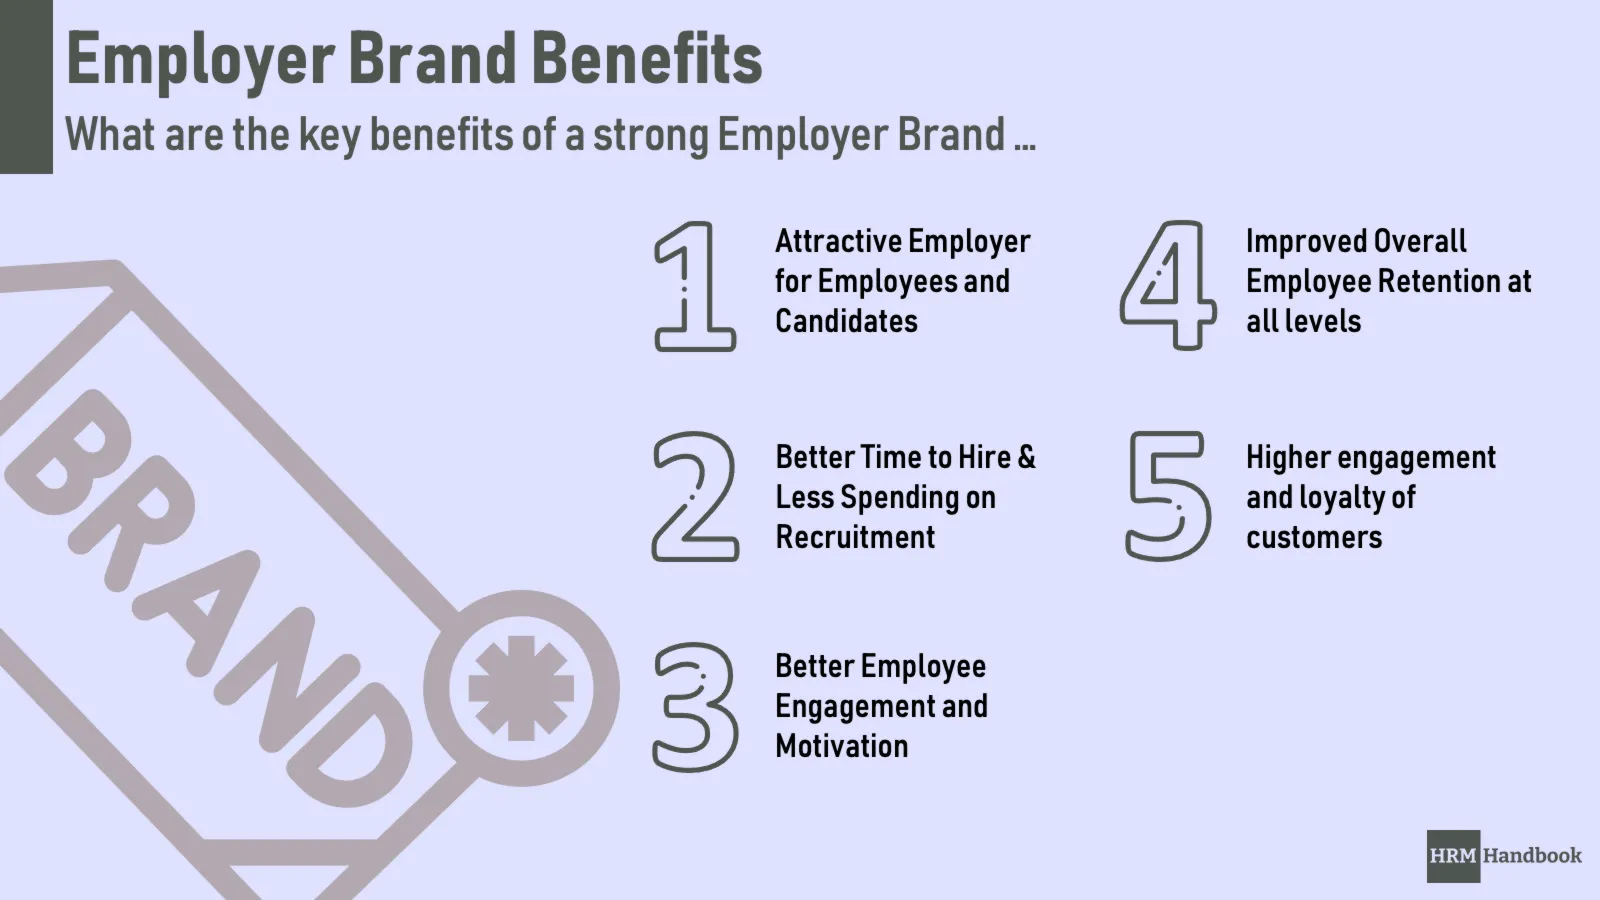 Key Benefits of a Strong Employer Brand